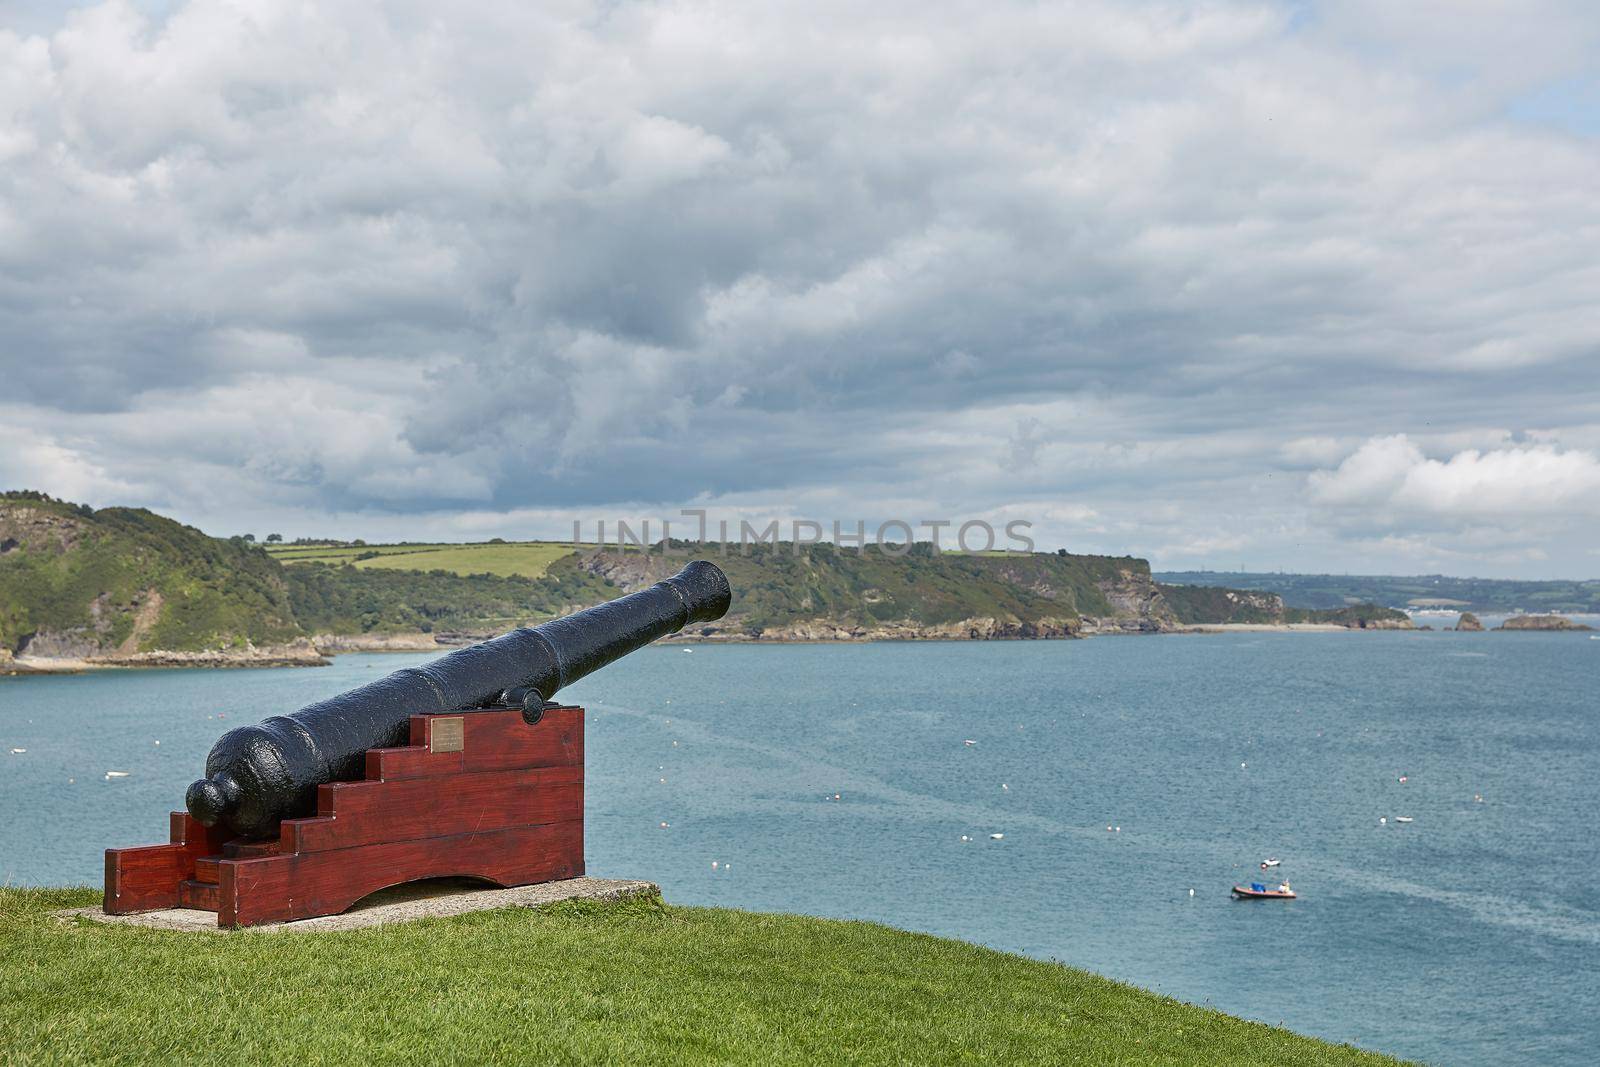 Memorial cannon at Tenby, an ancient walled town; now a tourist destination in the county of Pembrokeshire, south Wales, UK.